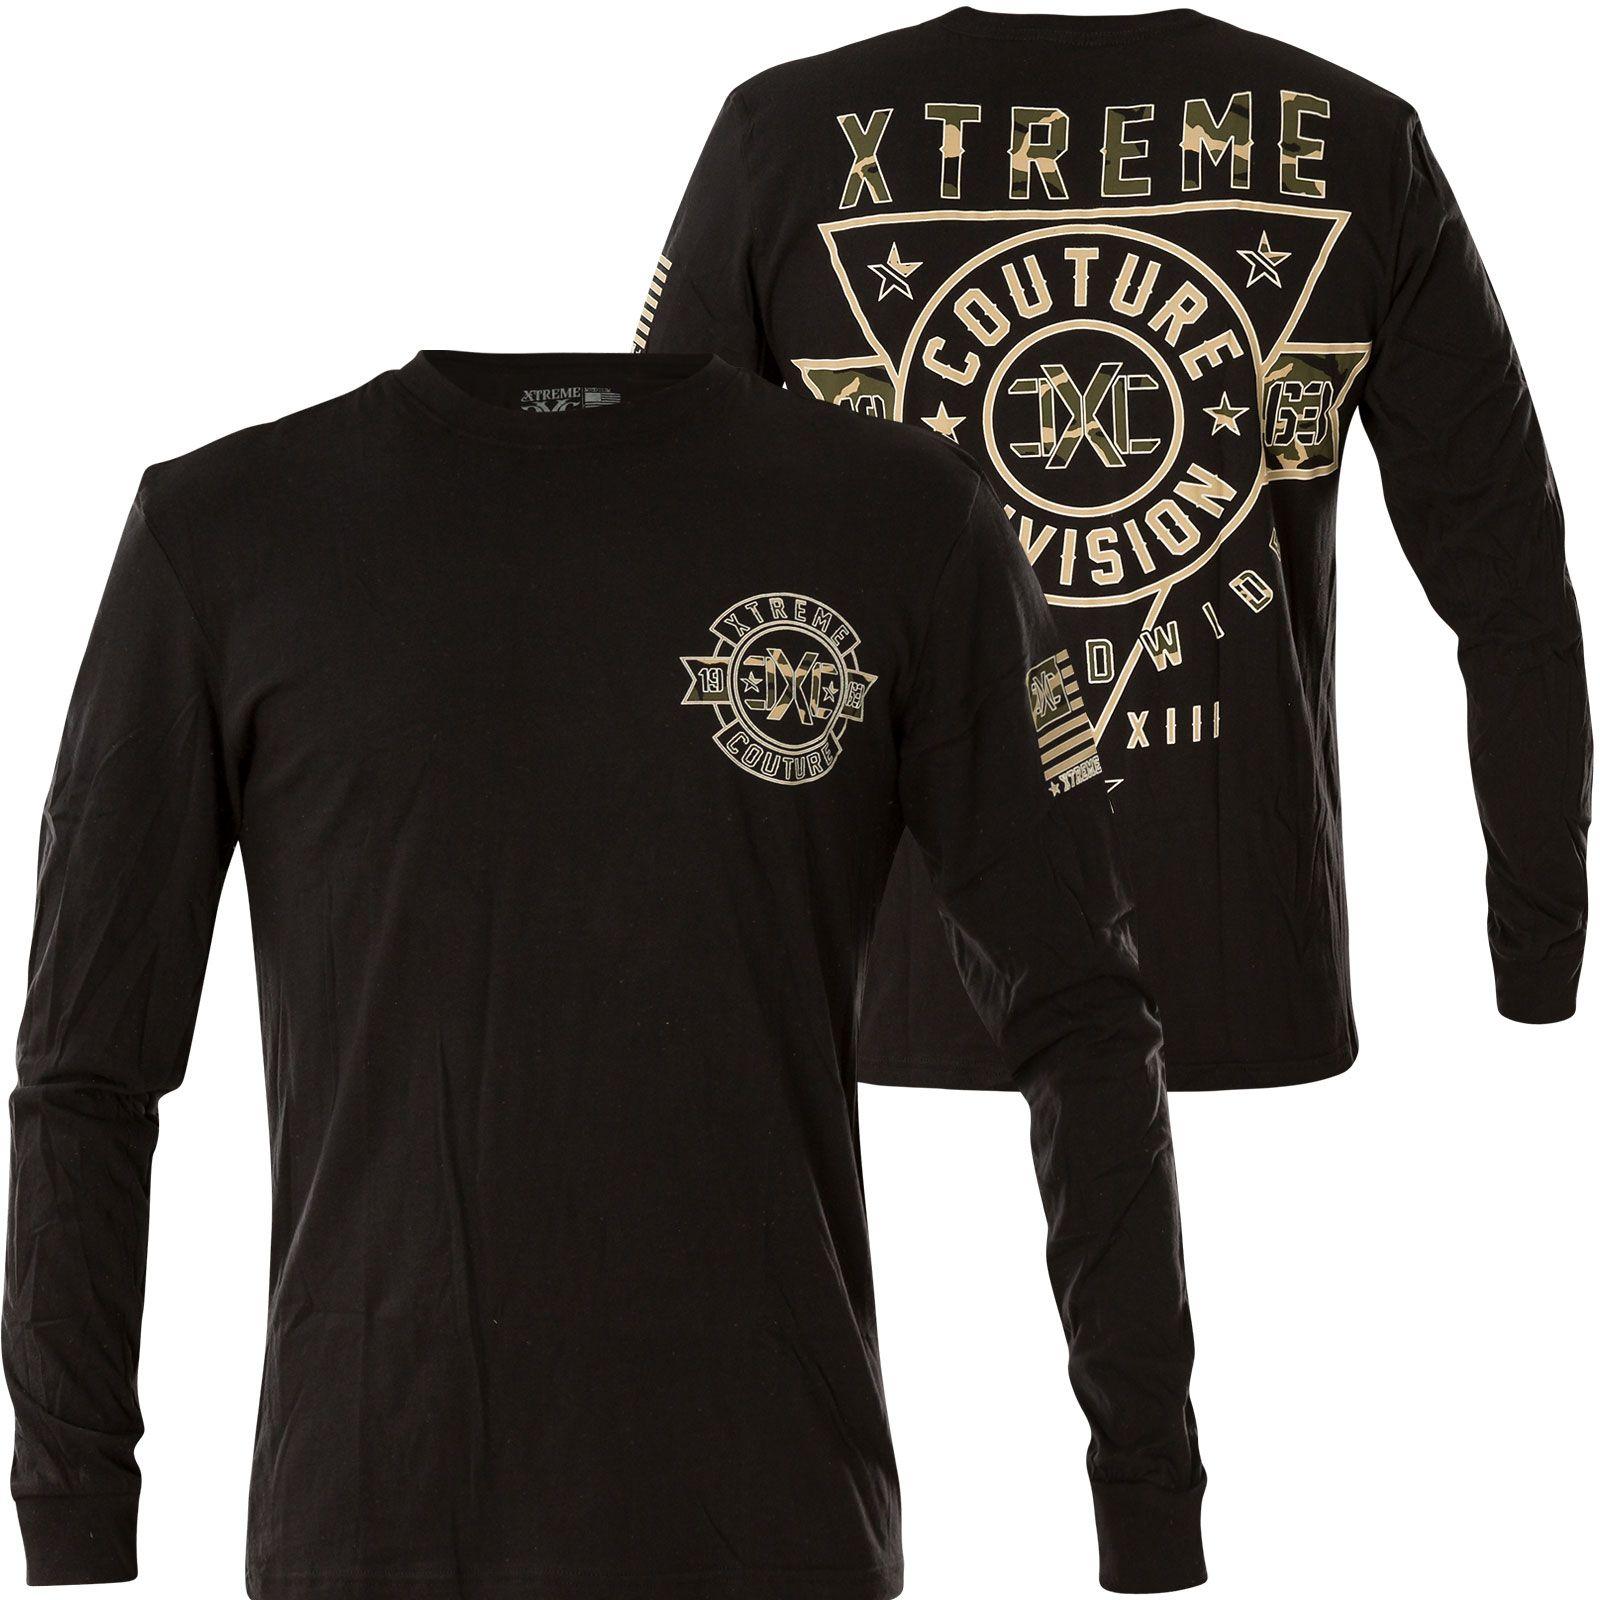 Xtreme Couture Logo - Xtreme Couture by Affliction Thermal Camo Force Print with a logo